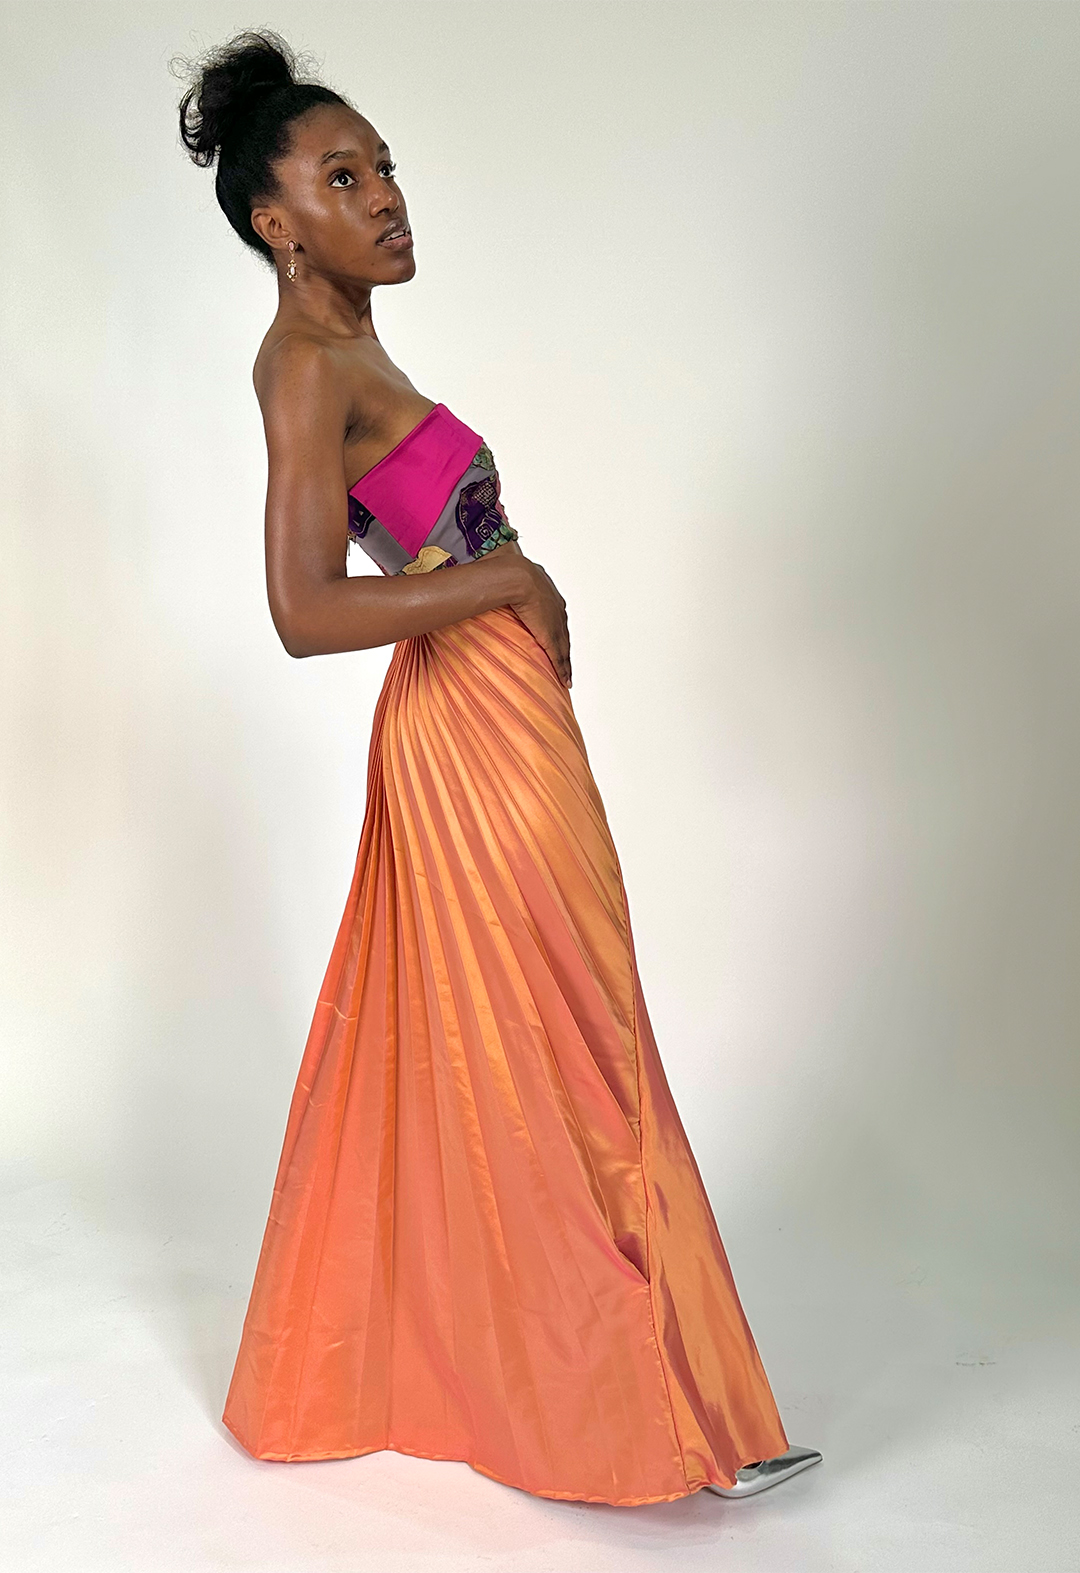 Model leans back while taking a step, showing the flow of the draping of the pleating, while hands are placed at the front.